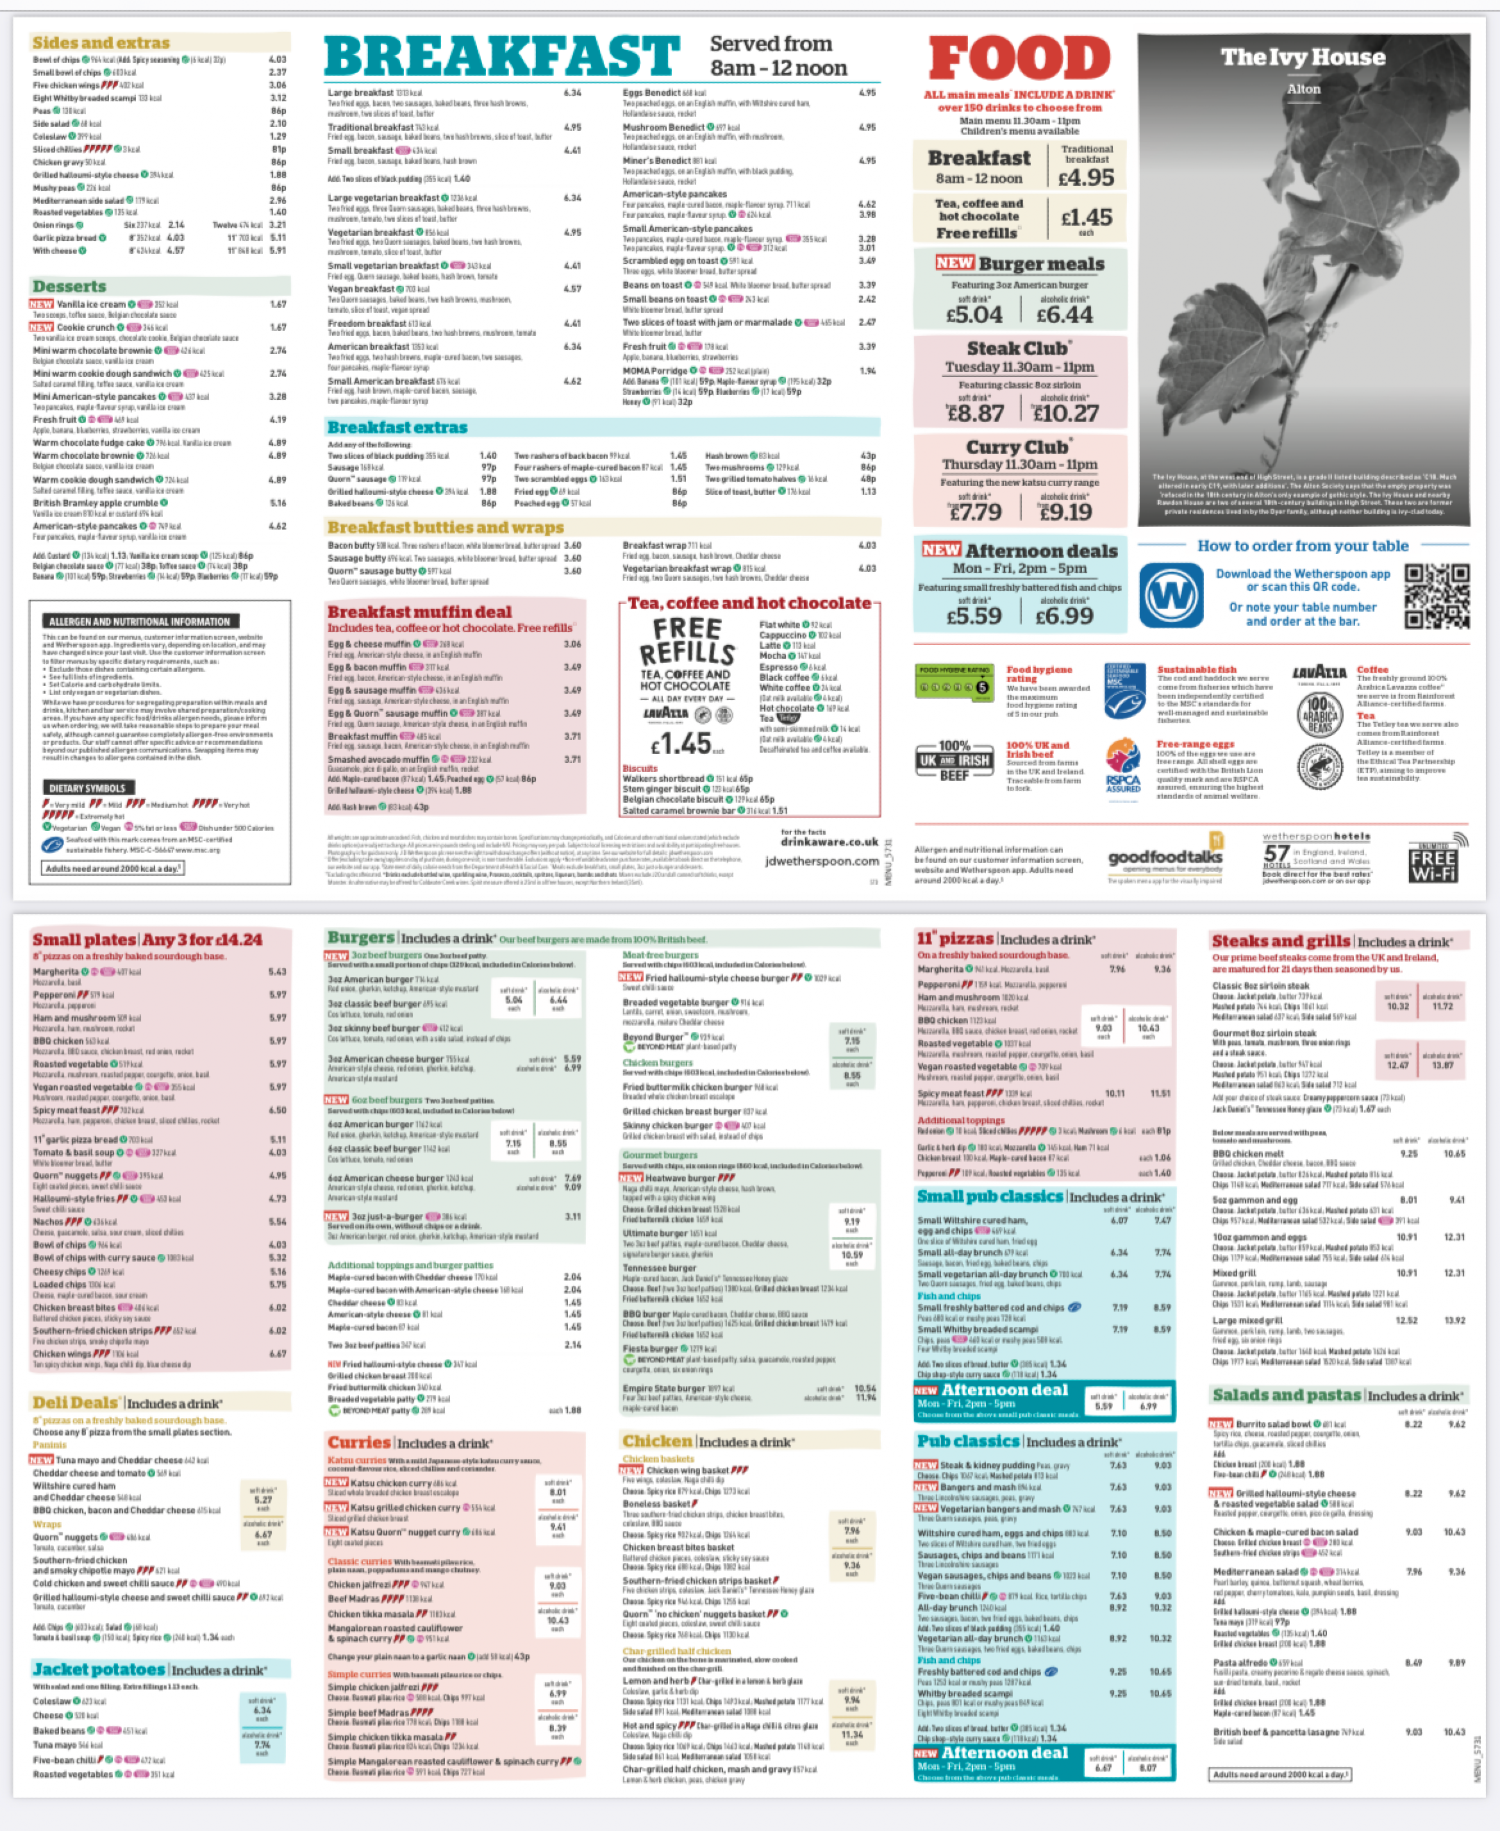 Takeaway Restaurant Menu Page - Wetherspoons – The Ivy House - Alton